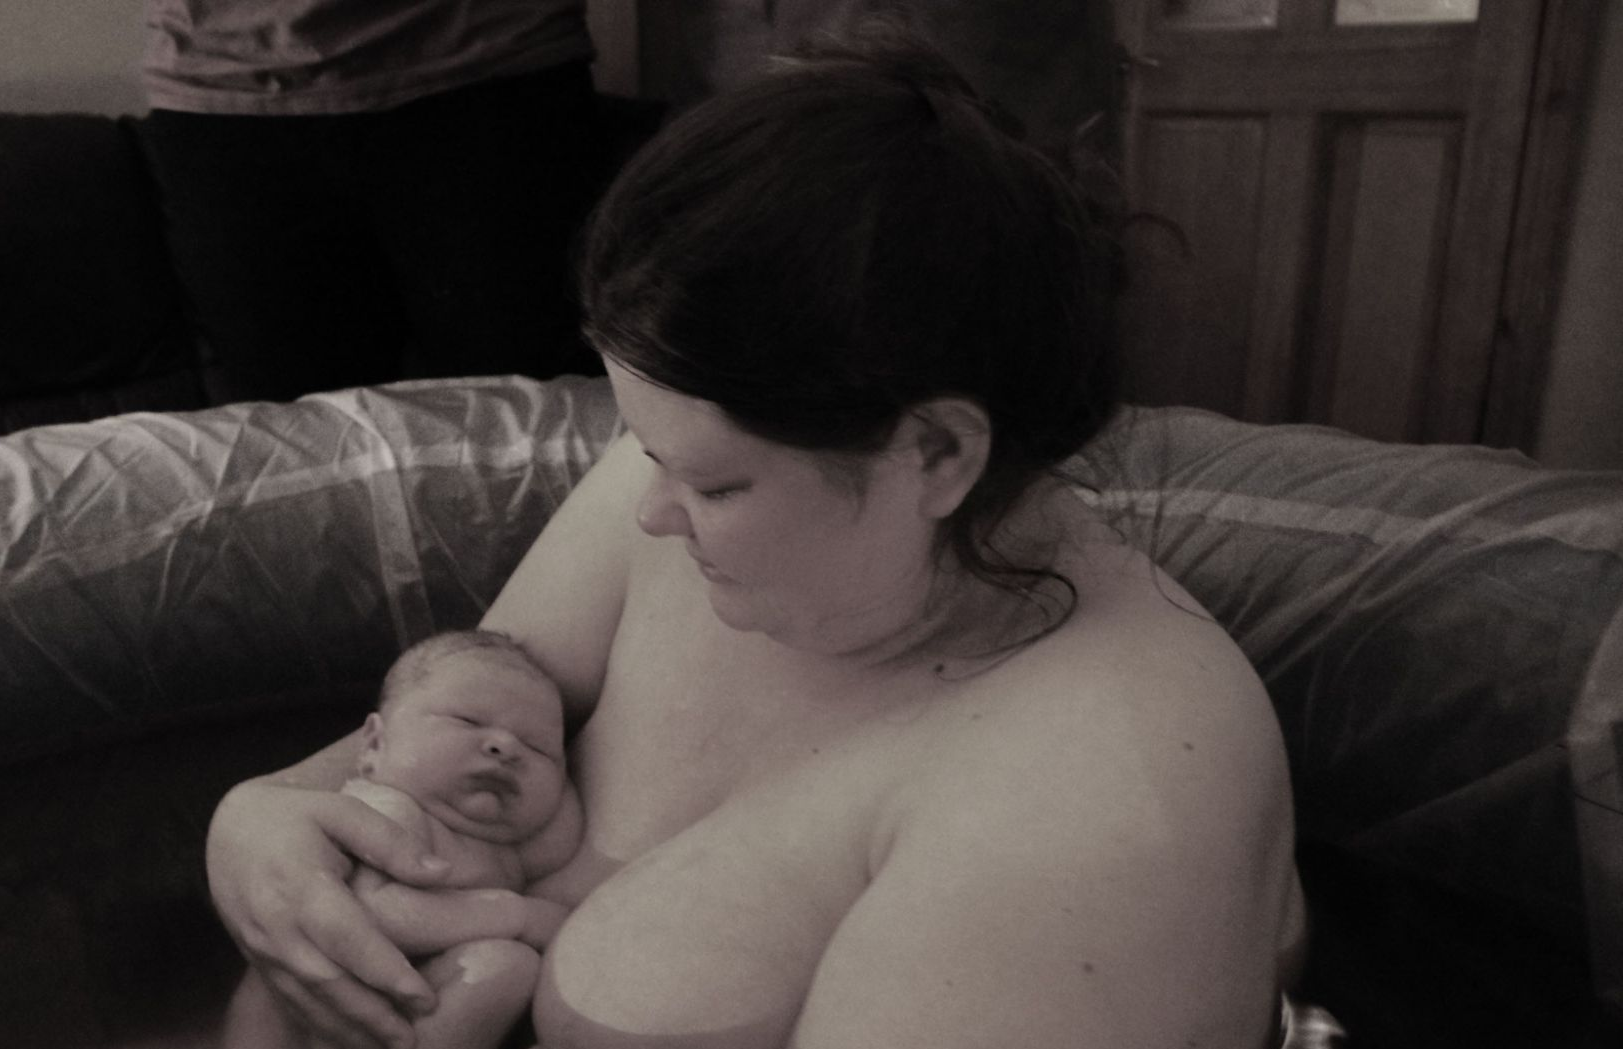 Black and white image of a woman in a birth pool holding her newborn baby.